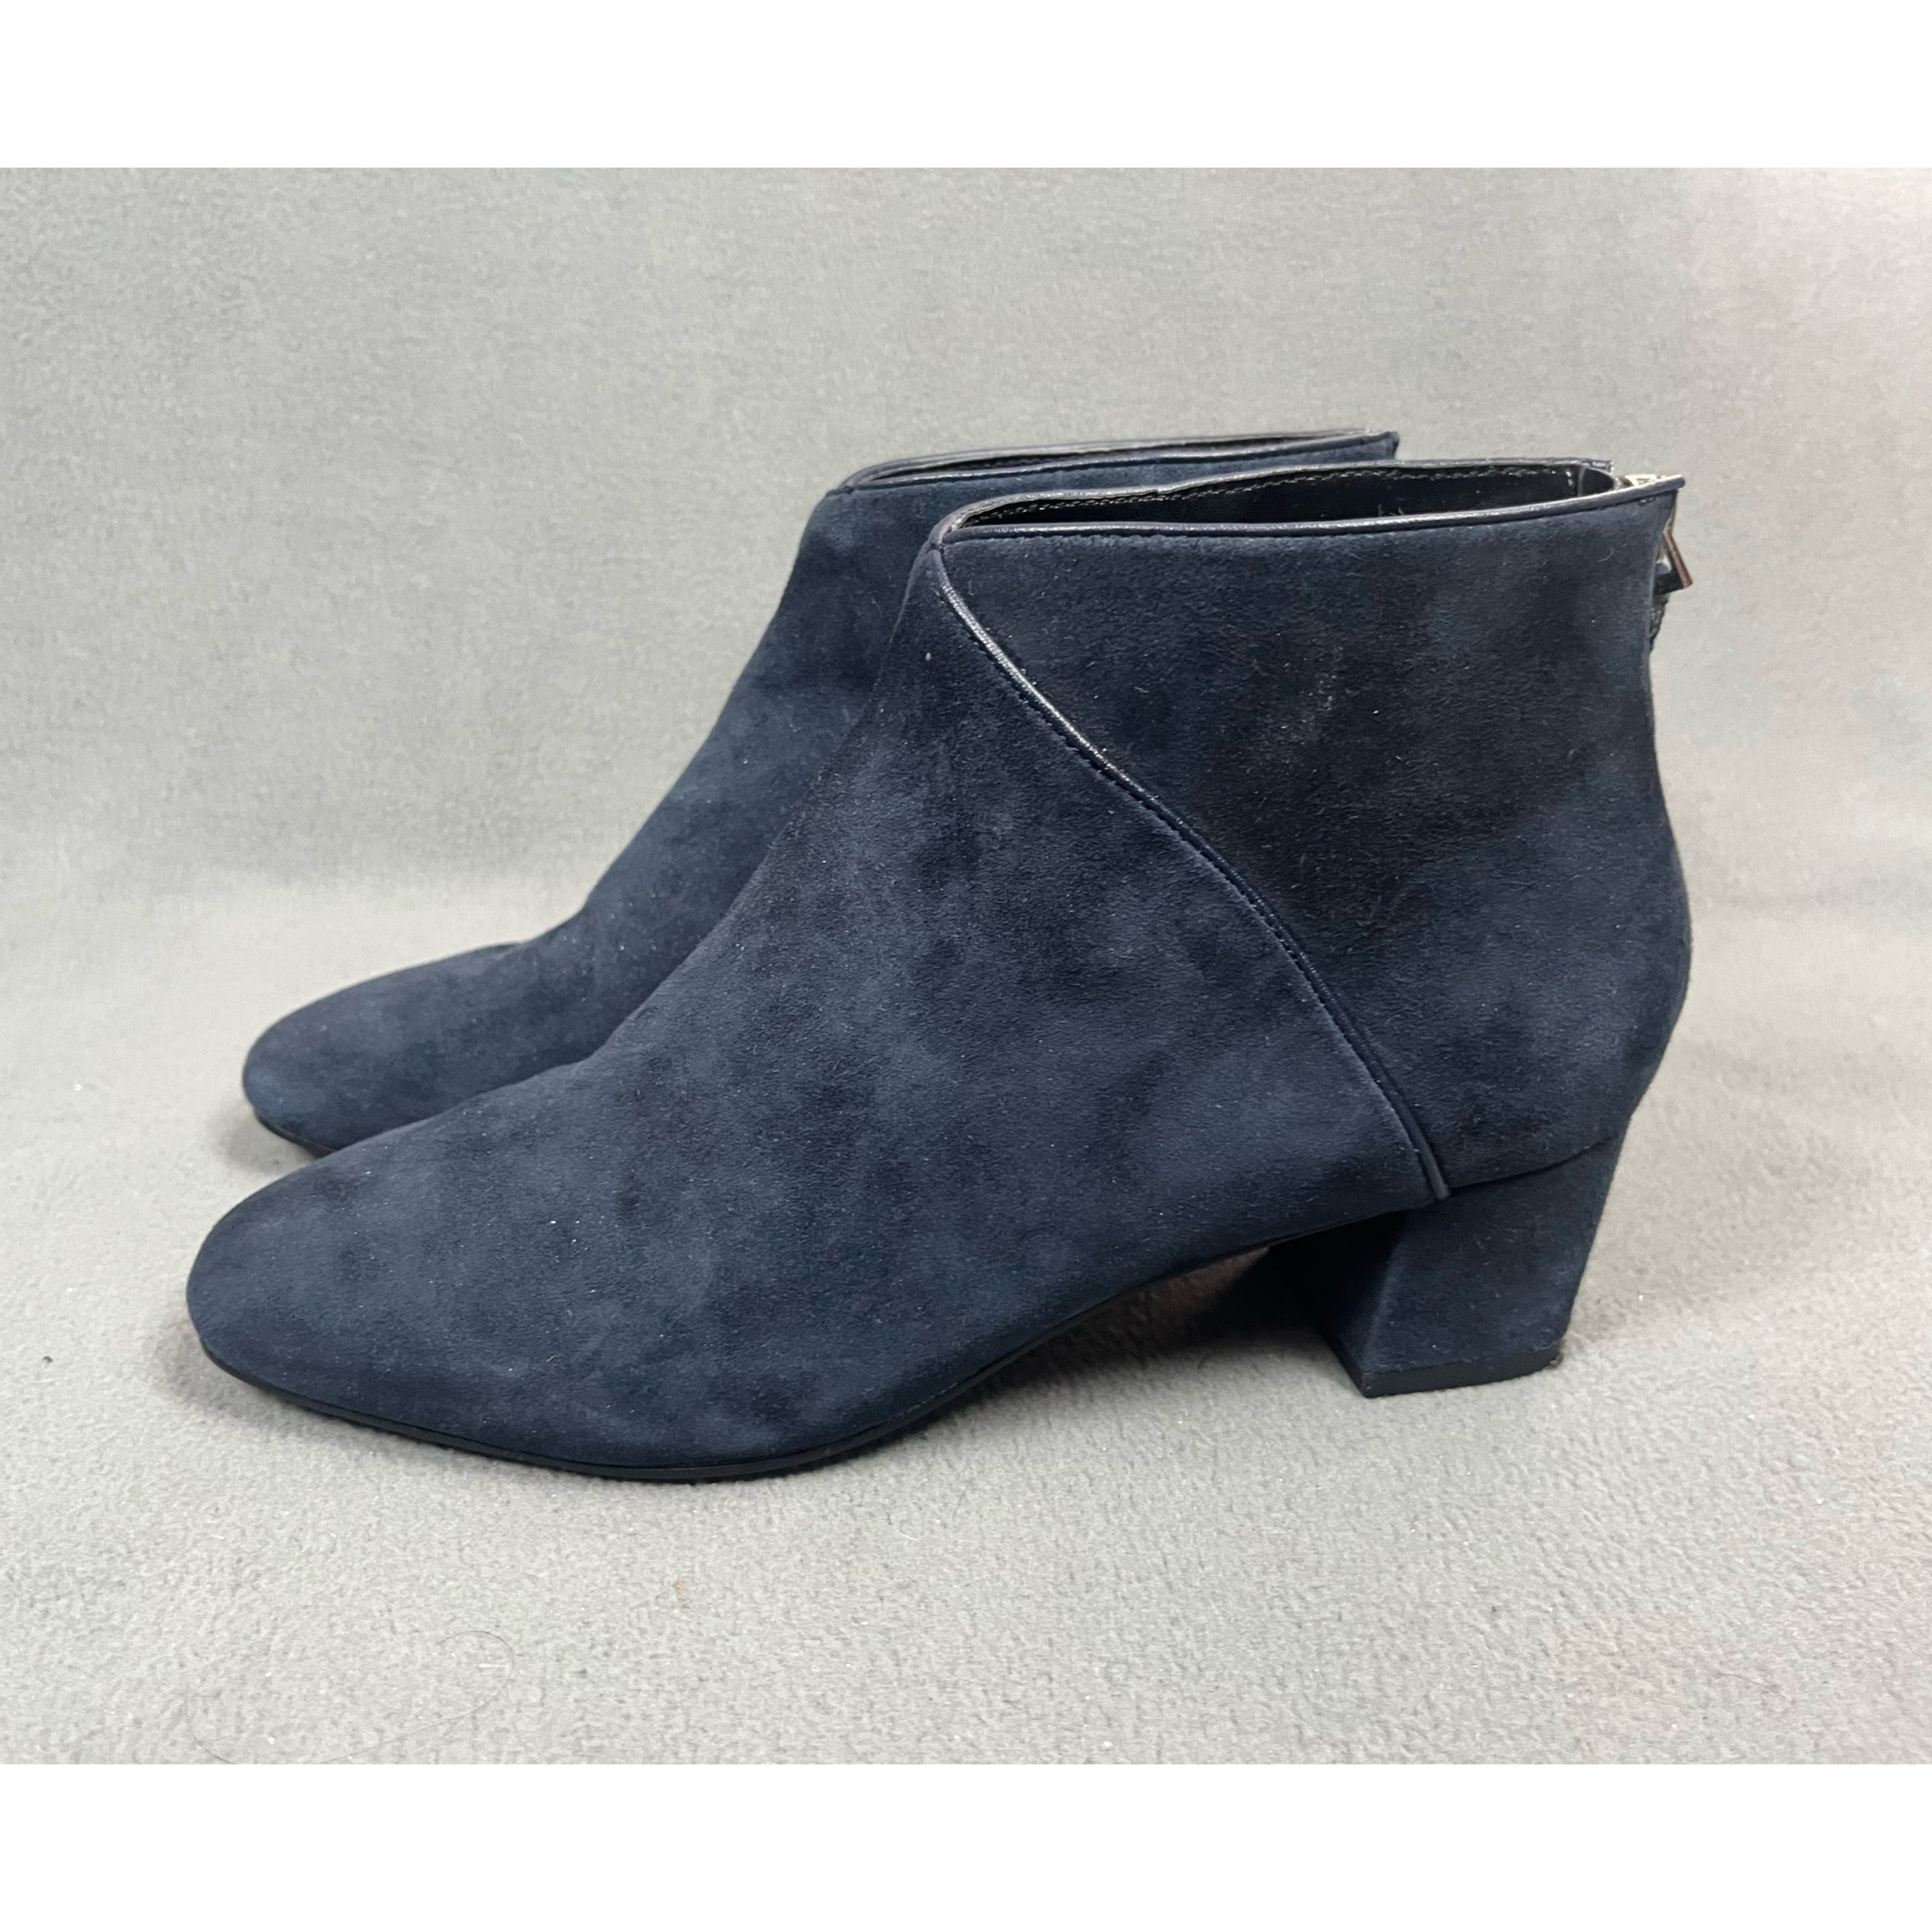 Nine West navy suede boots, size 6, NEW IN BOX!